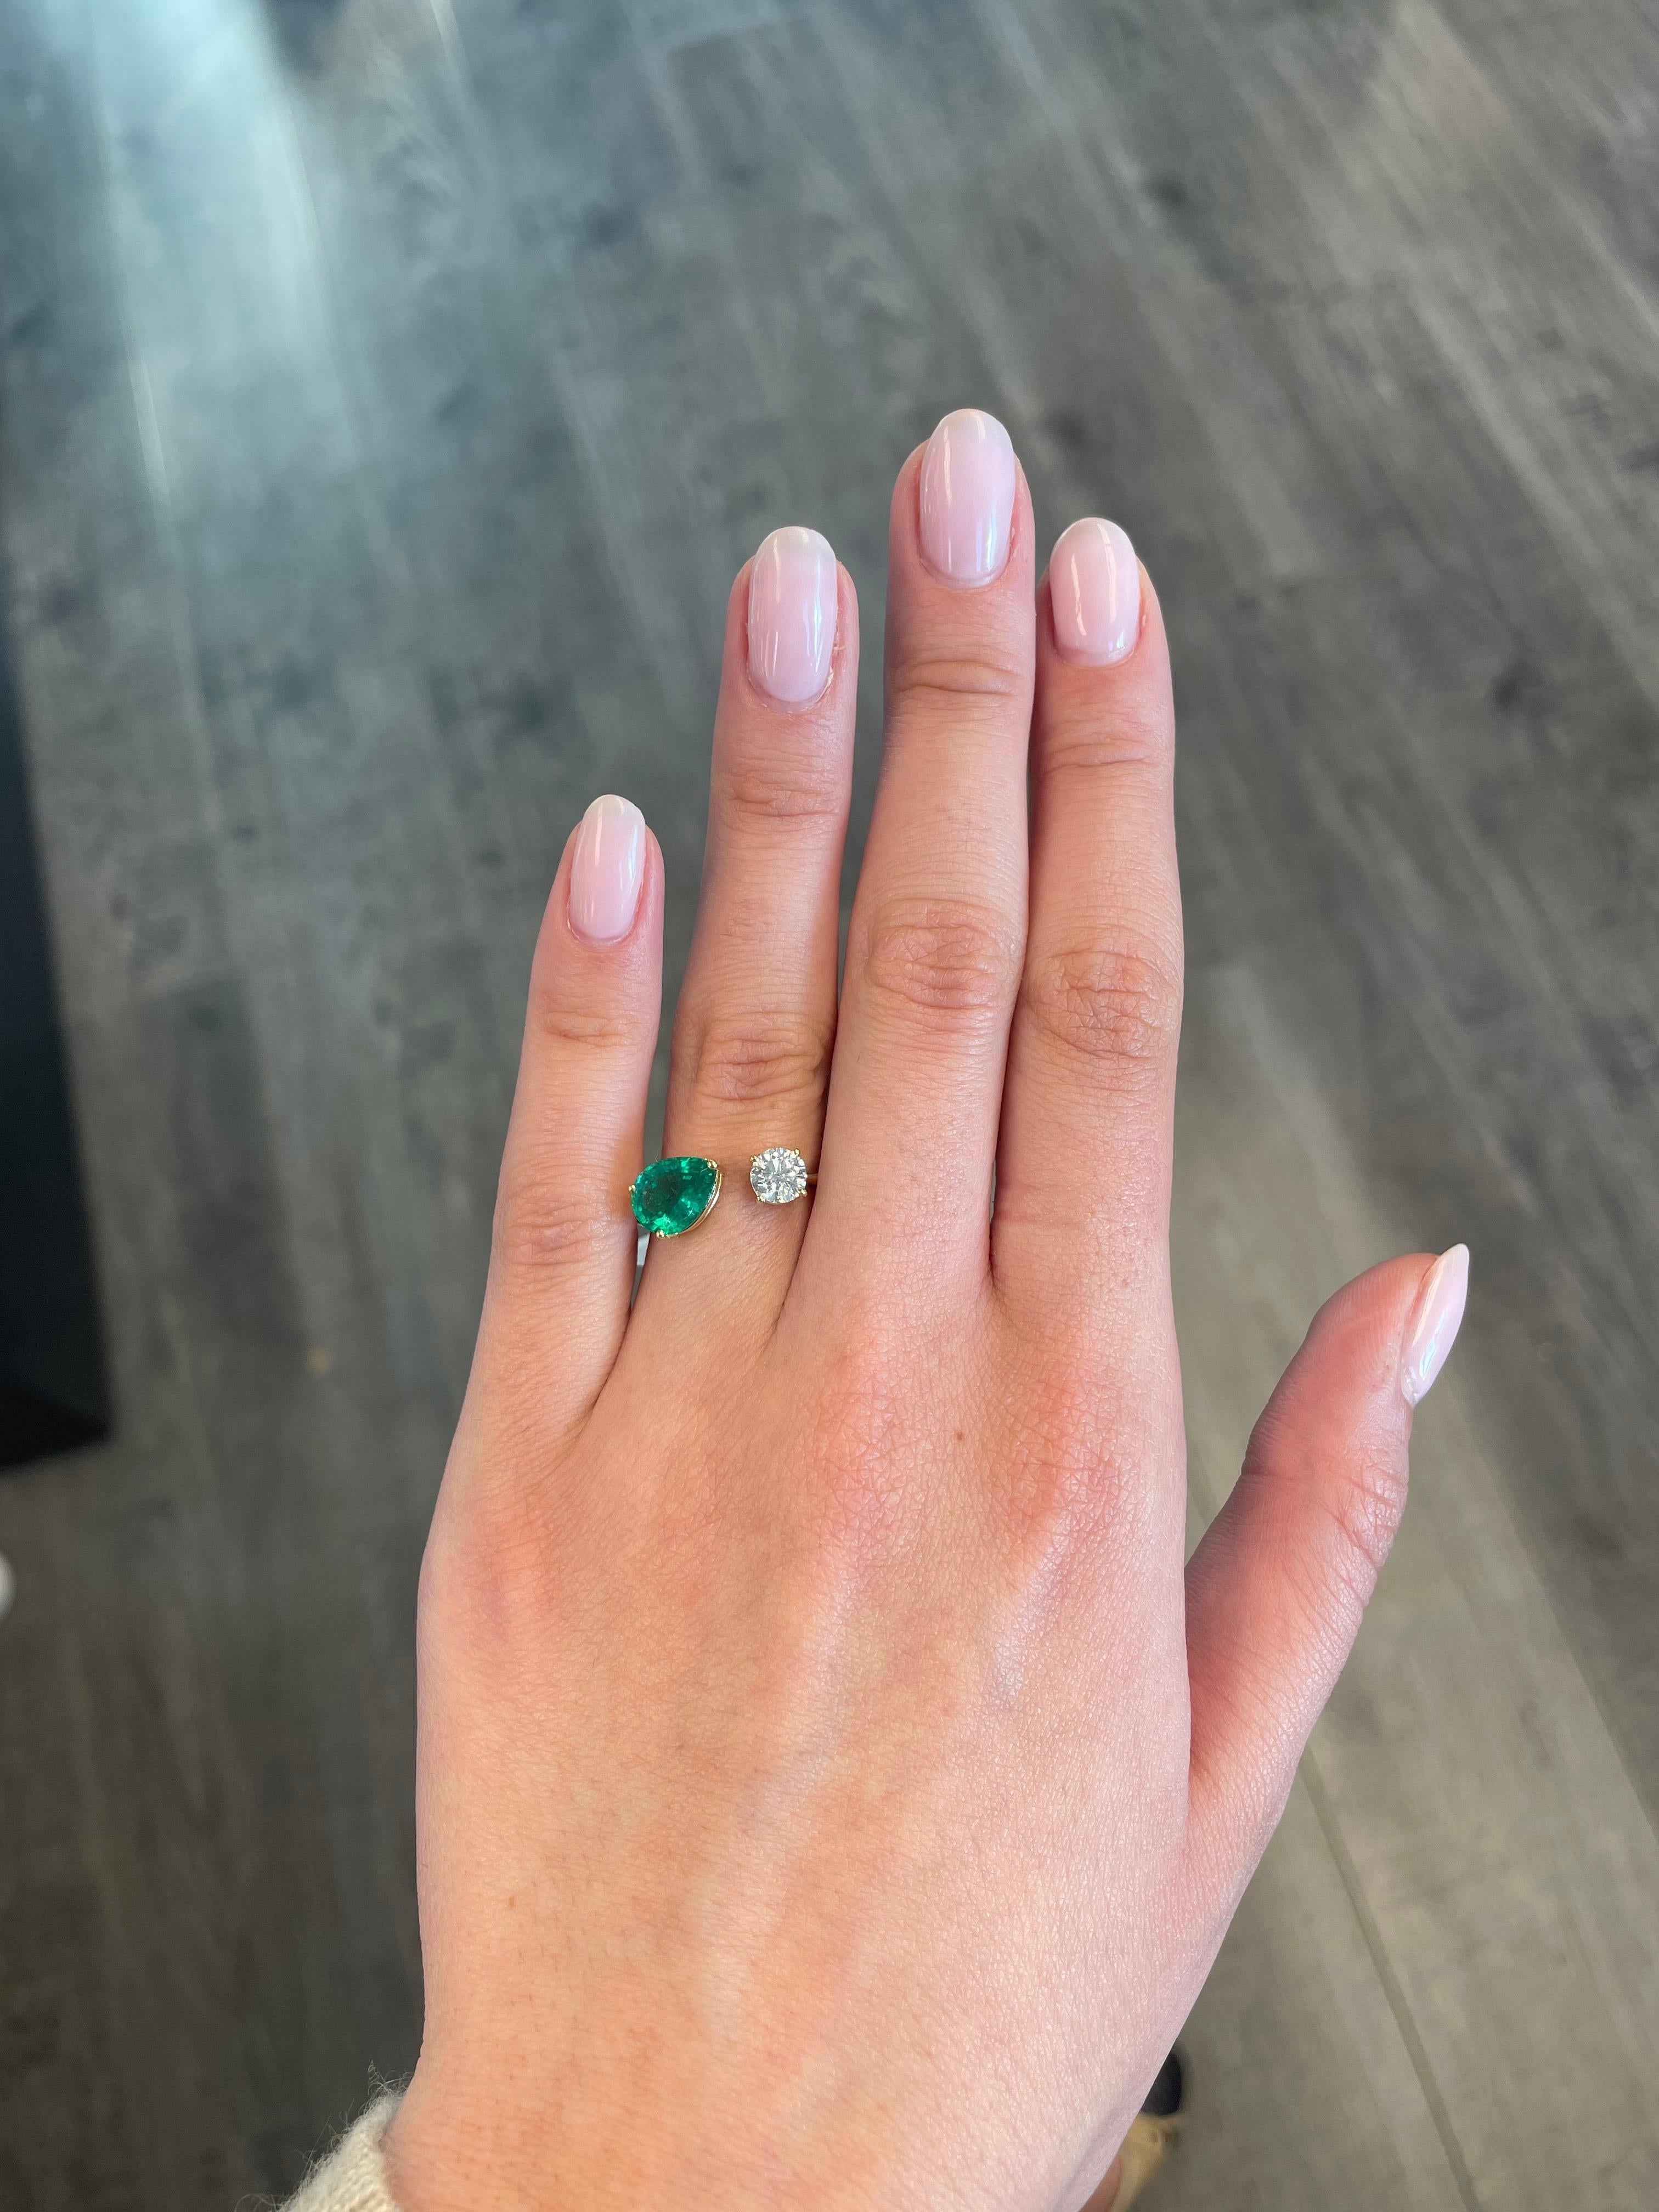 Stunning modern floating emerald and diamond toi et moi ring. By Alexander Beverly Hills.
1.58 carat pear shape emerald. 0.51 carat round brilliant diamond, approximately G/H color, and SI clarity. 18-karat yellow gold, 3.37 grams, current ring size